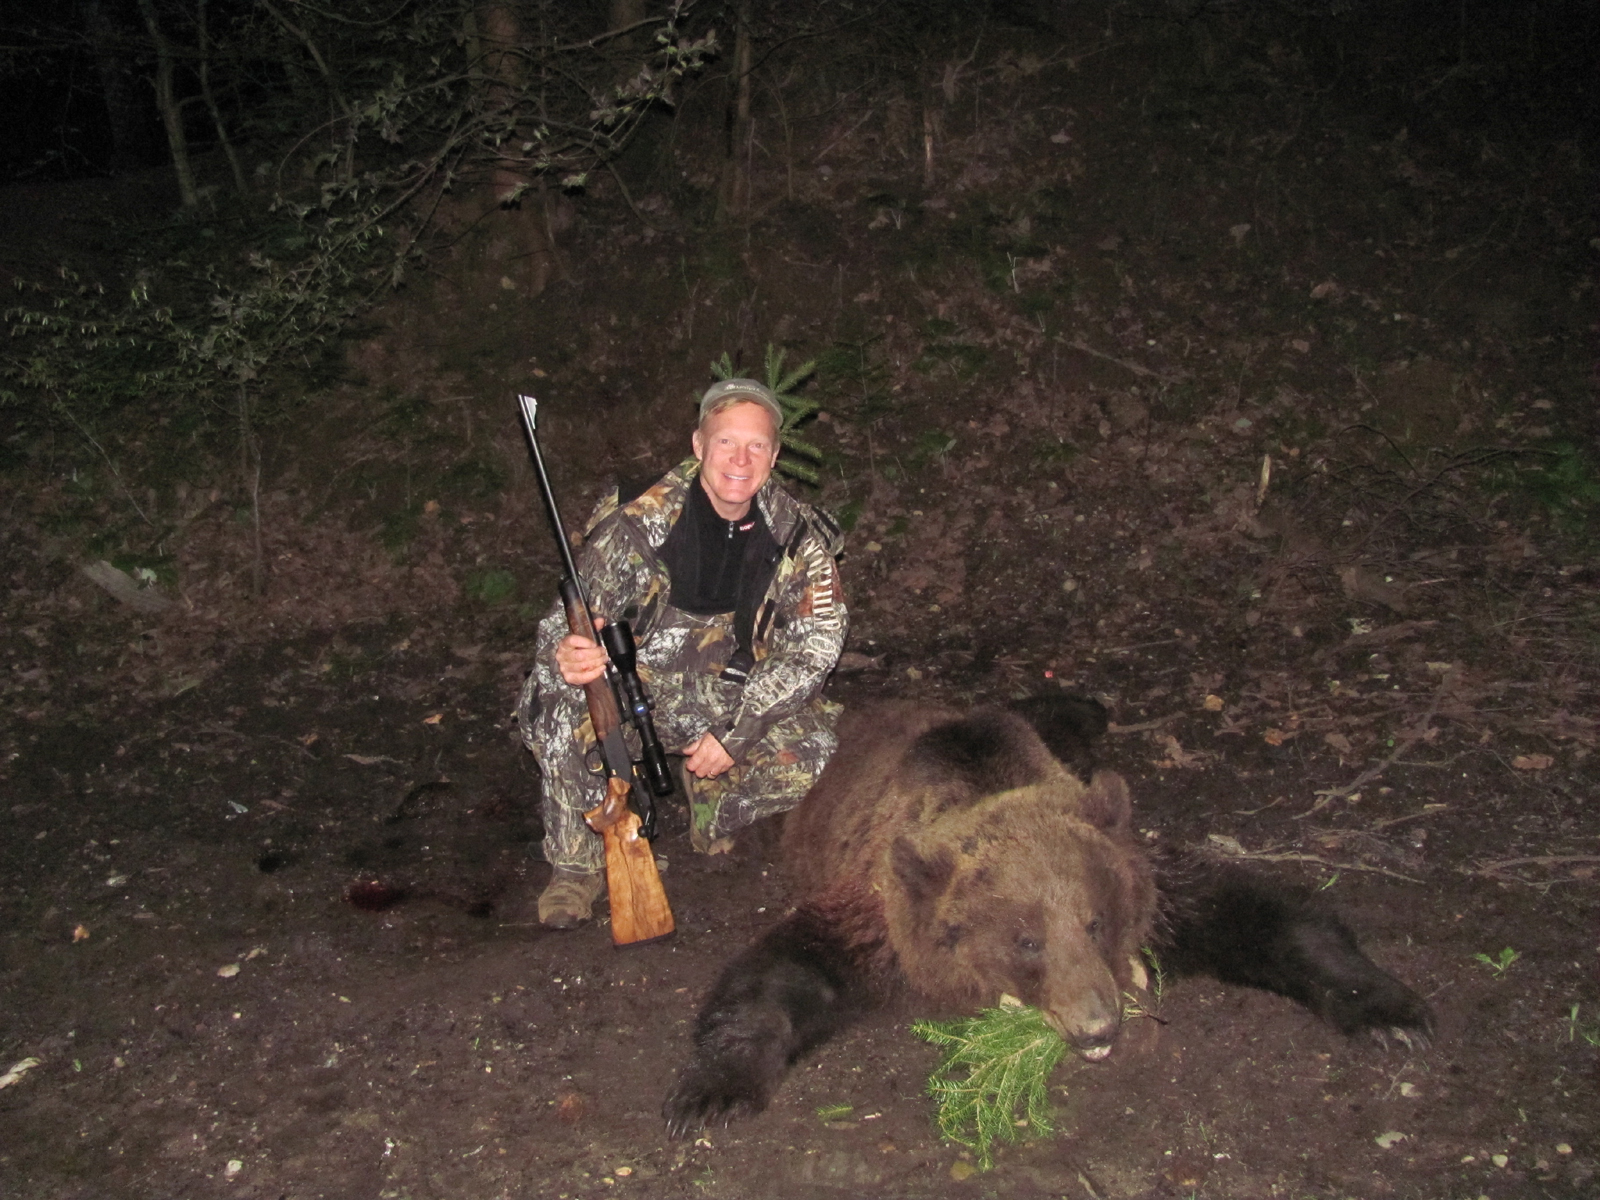 This Eurasian brown bear was taken in Romania in 2010 with a Blaser R8 and .338 Blaser Magnum barrel, topped with a Zeiss Victory 3-10x50mm scope.